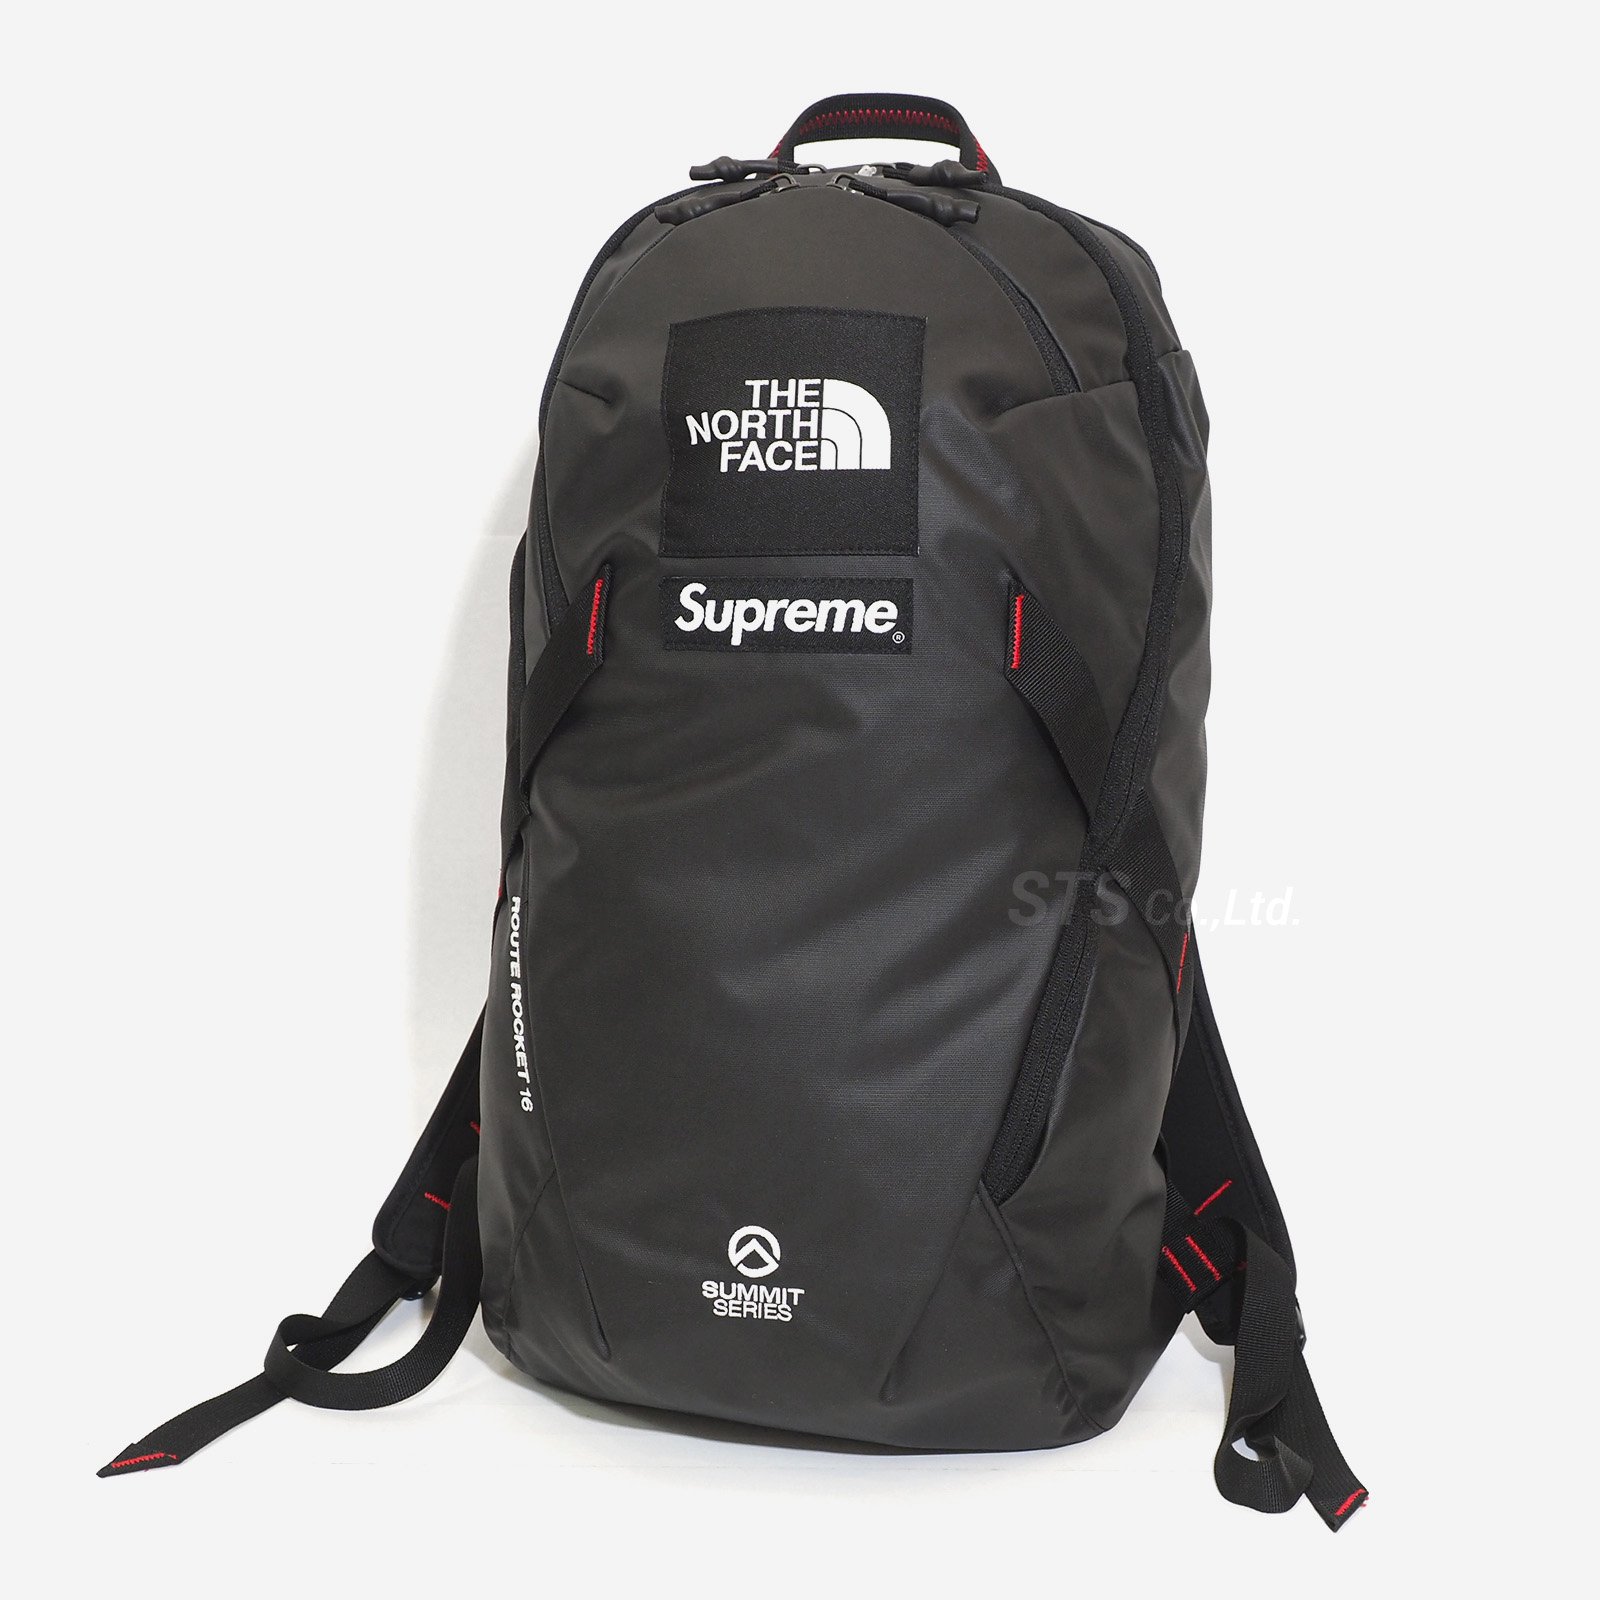 Supreme/The North Face Summit Series Outer Tape Seam Route Rocket 